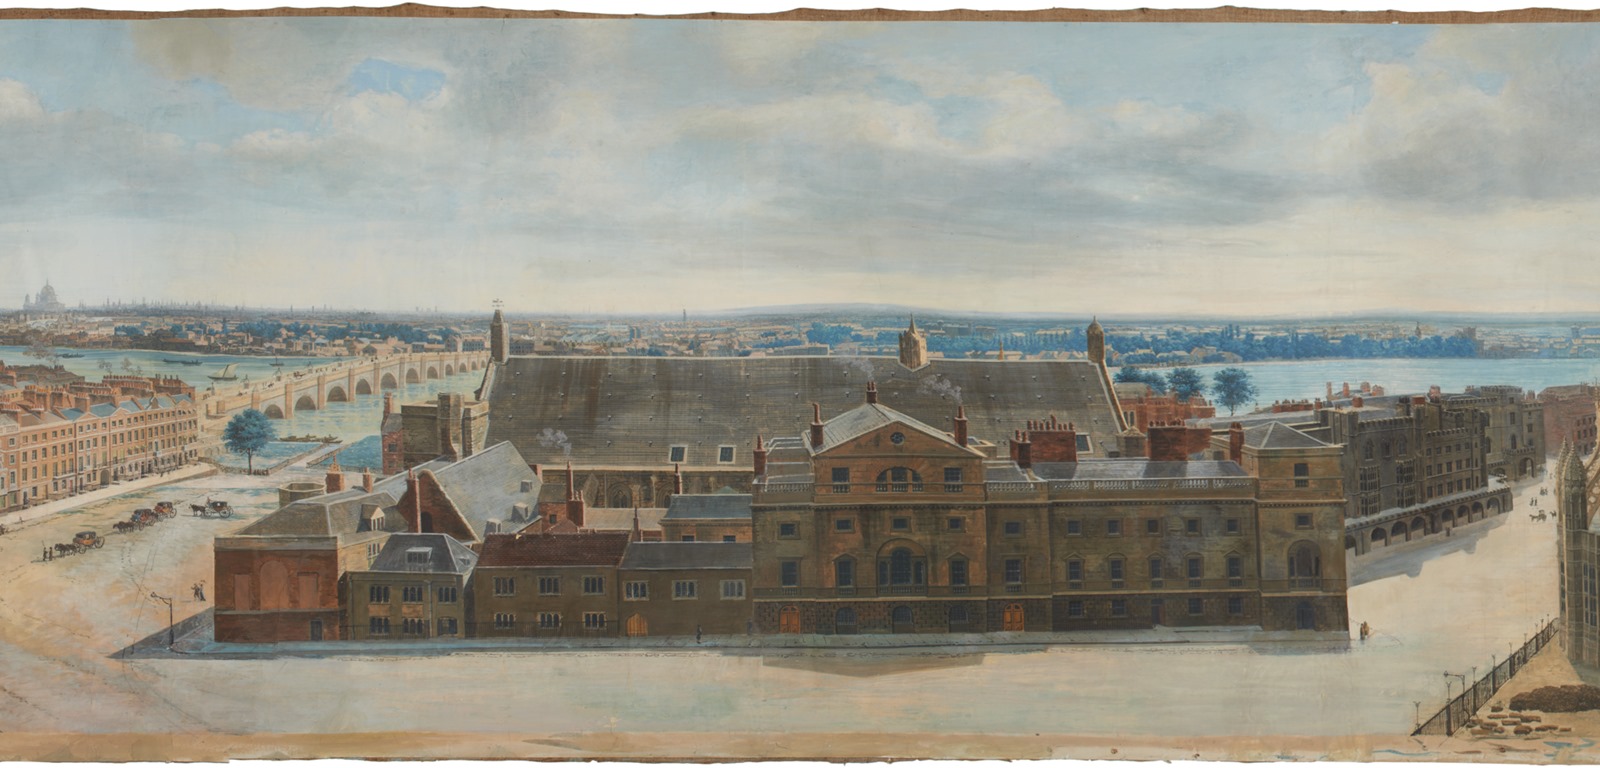 A Panoramic view of London, from the Tower of St. Margaret's Church, Westminster (detail), gouache on paper, c.1815, by Pierre Prévost. (ID no.: 2018.38)